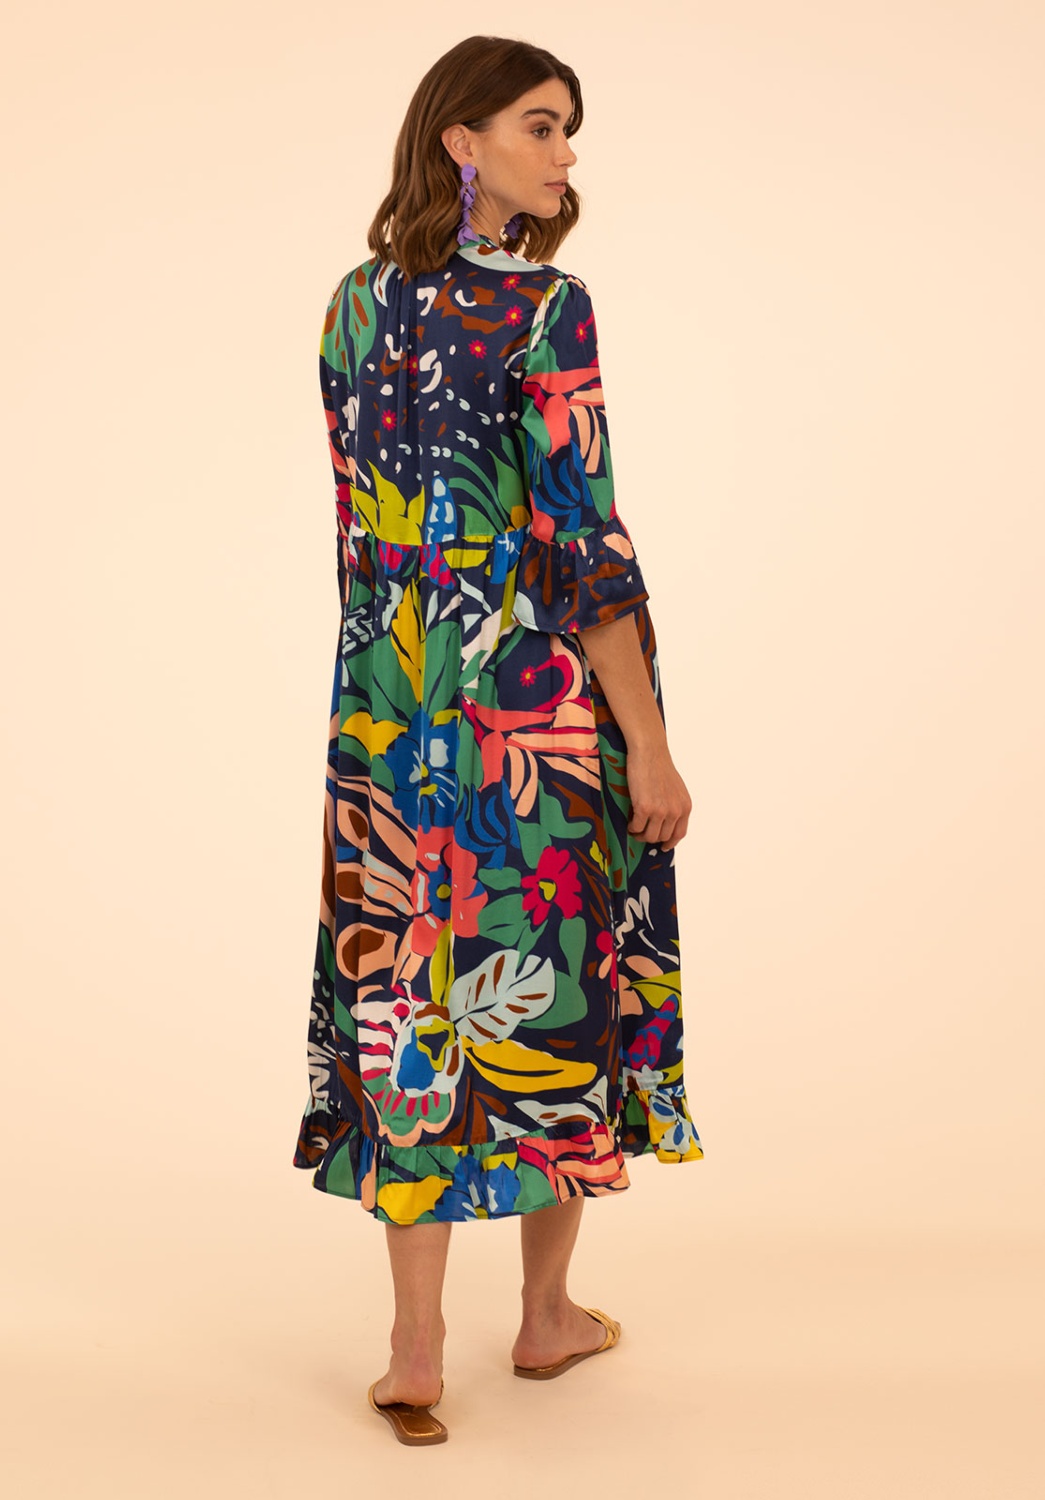 Robe tropicale 3